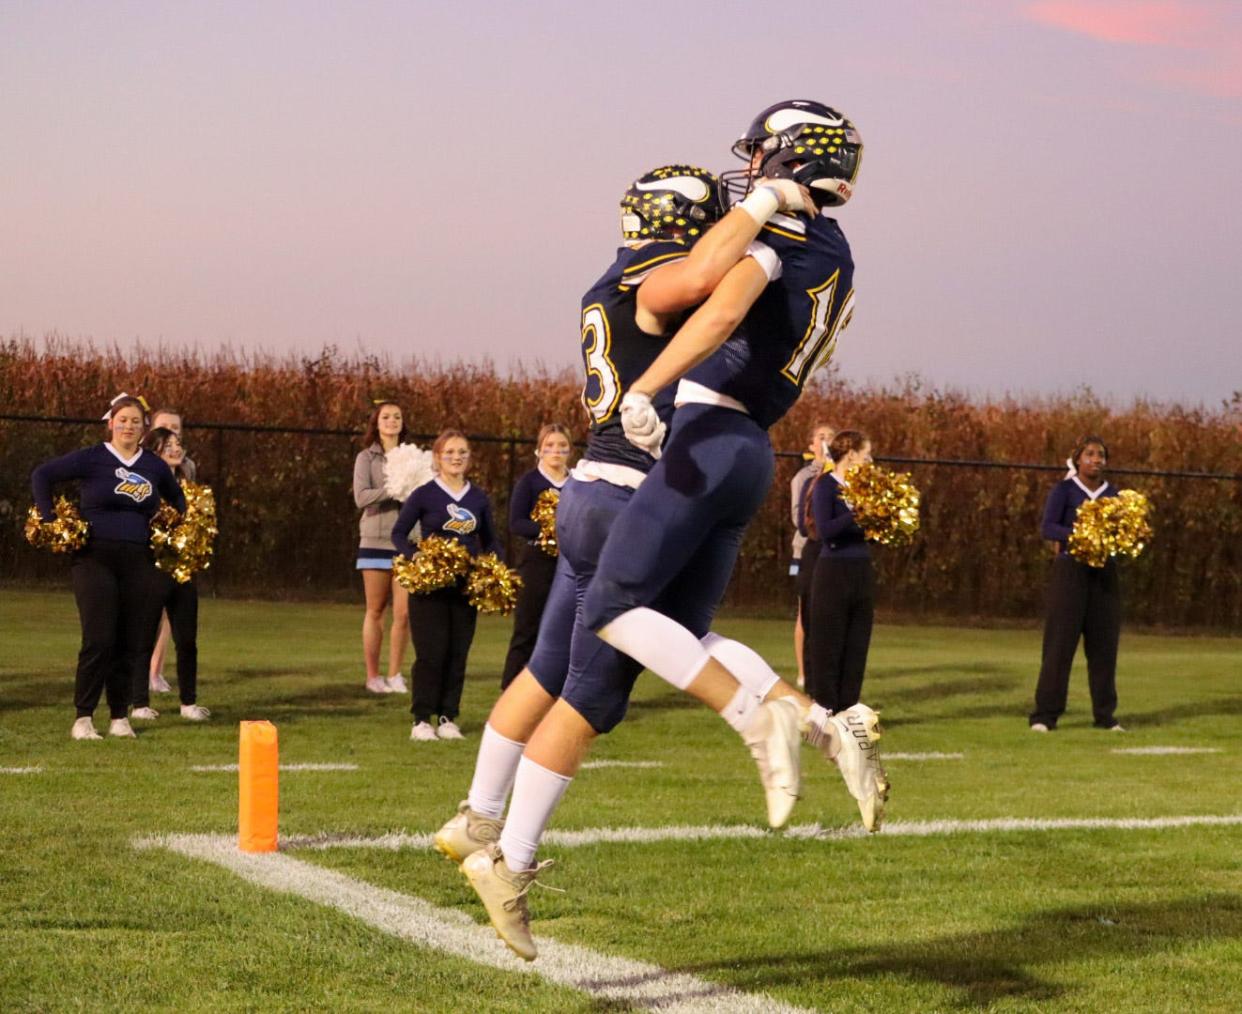 River Valley's Brock Mosher, right, and Will Garrison celebrate a touchdown during a football game against Marion Harding earlier this season.